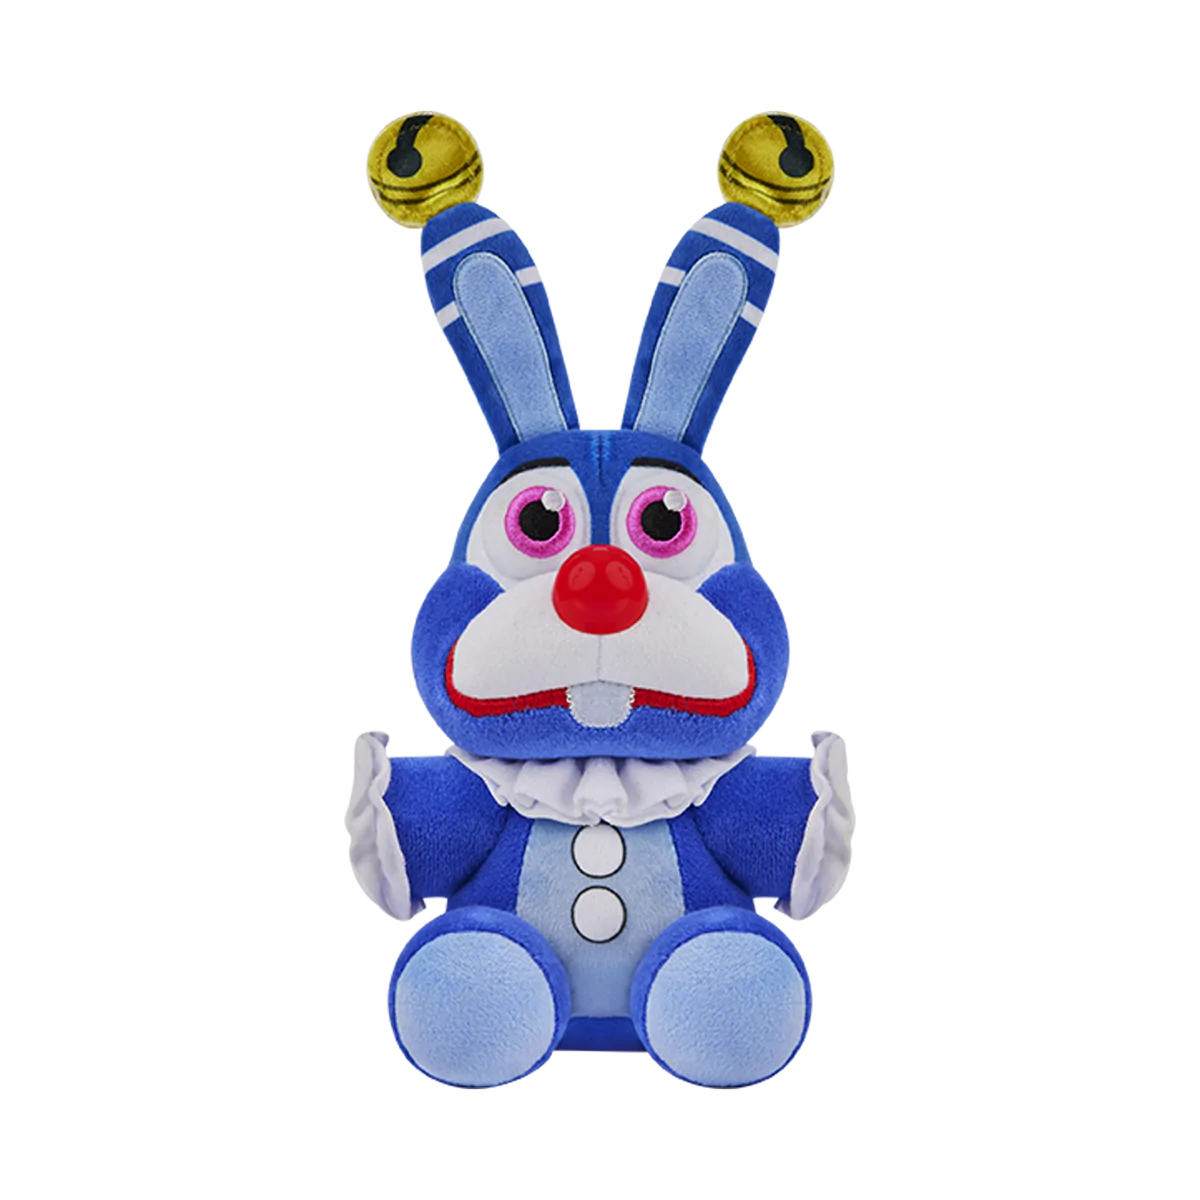 Five Nights At Freddy's - Bonnie - Plush by roobbo on DeviantArt